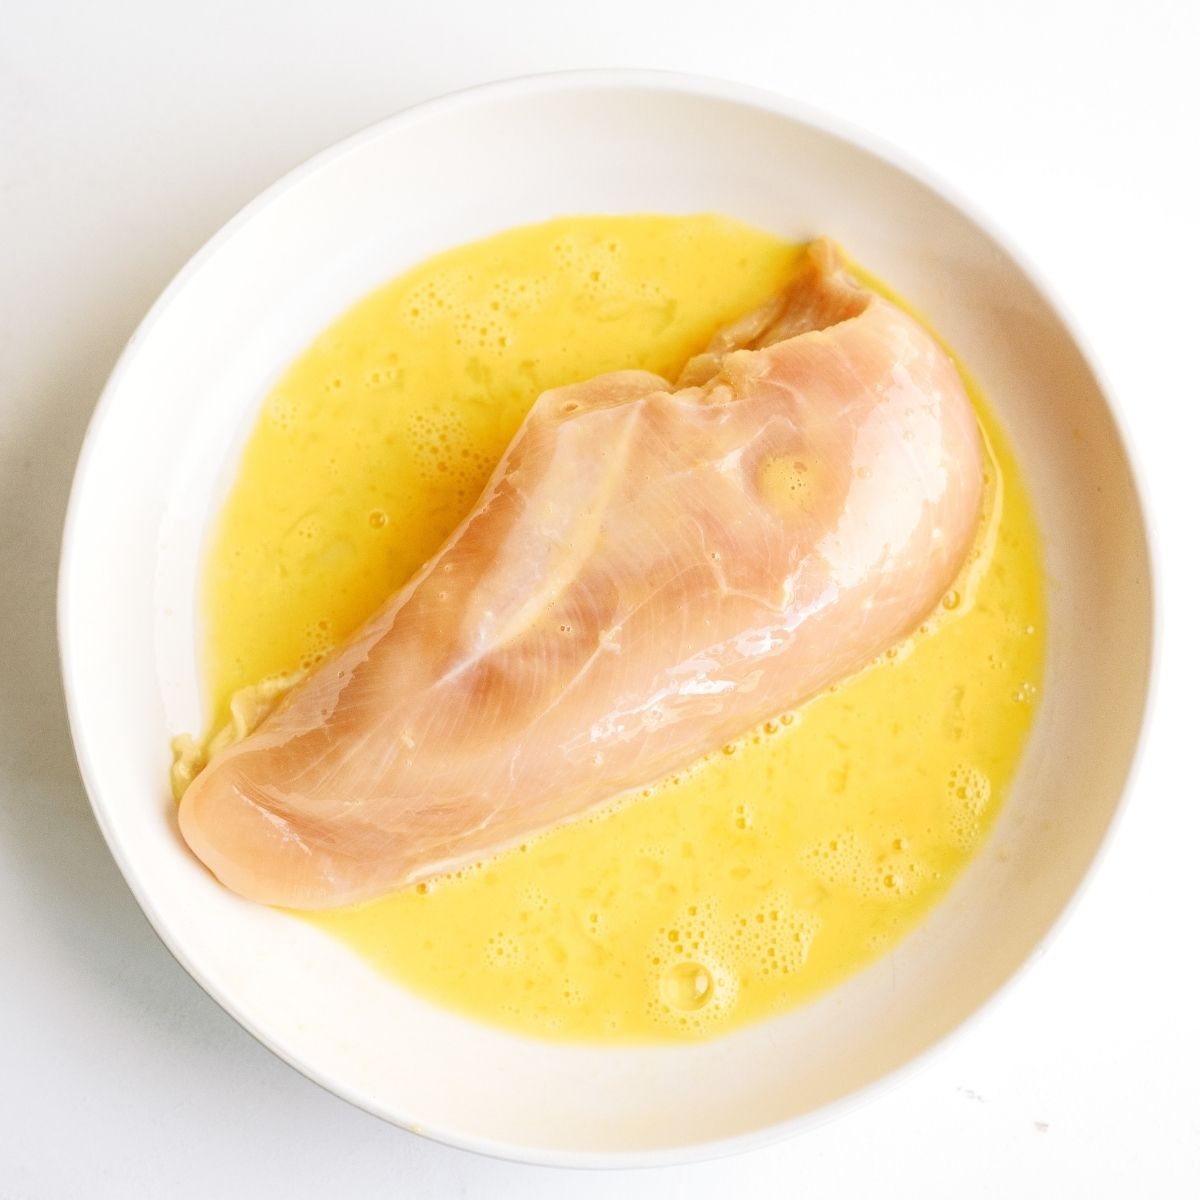 Raw chicken dipped in egg